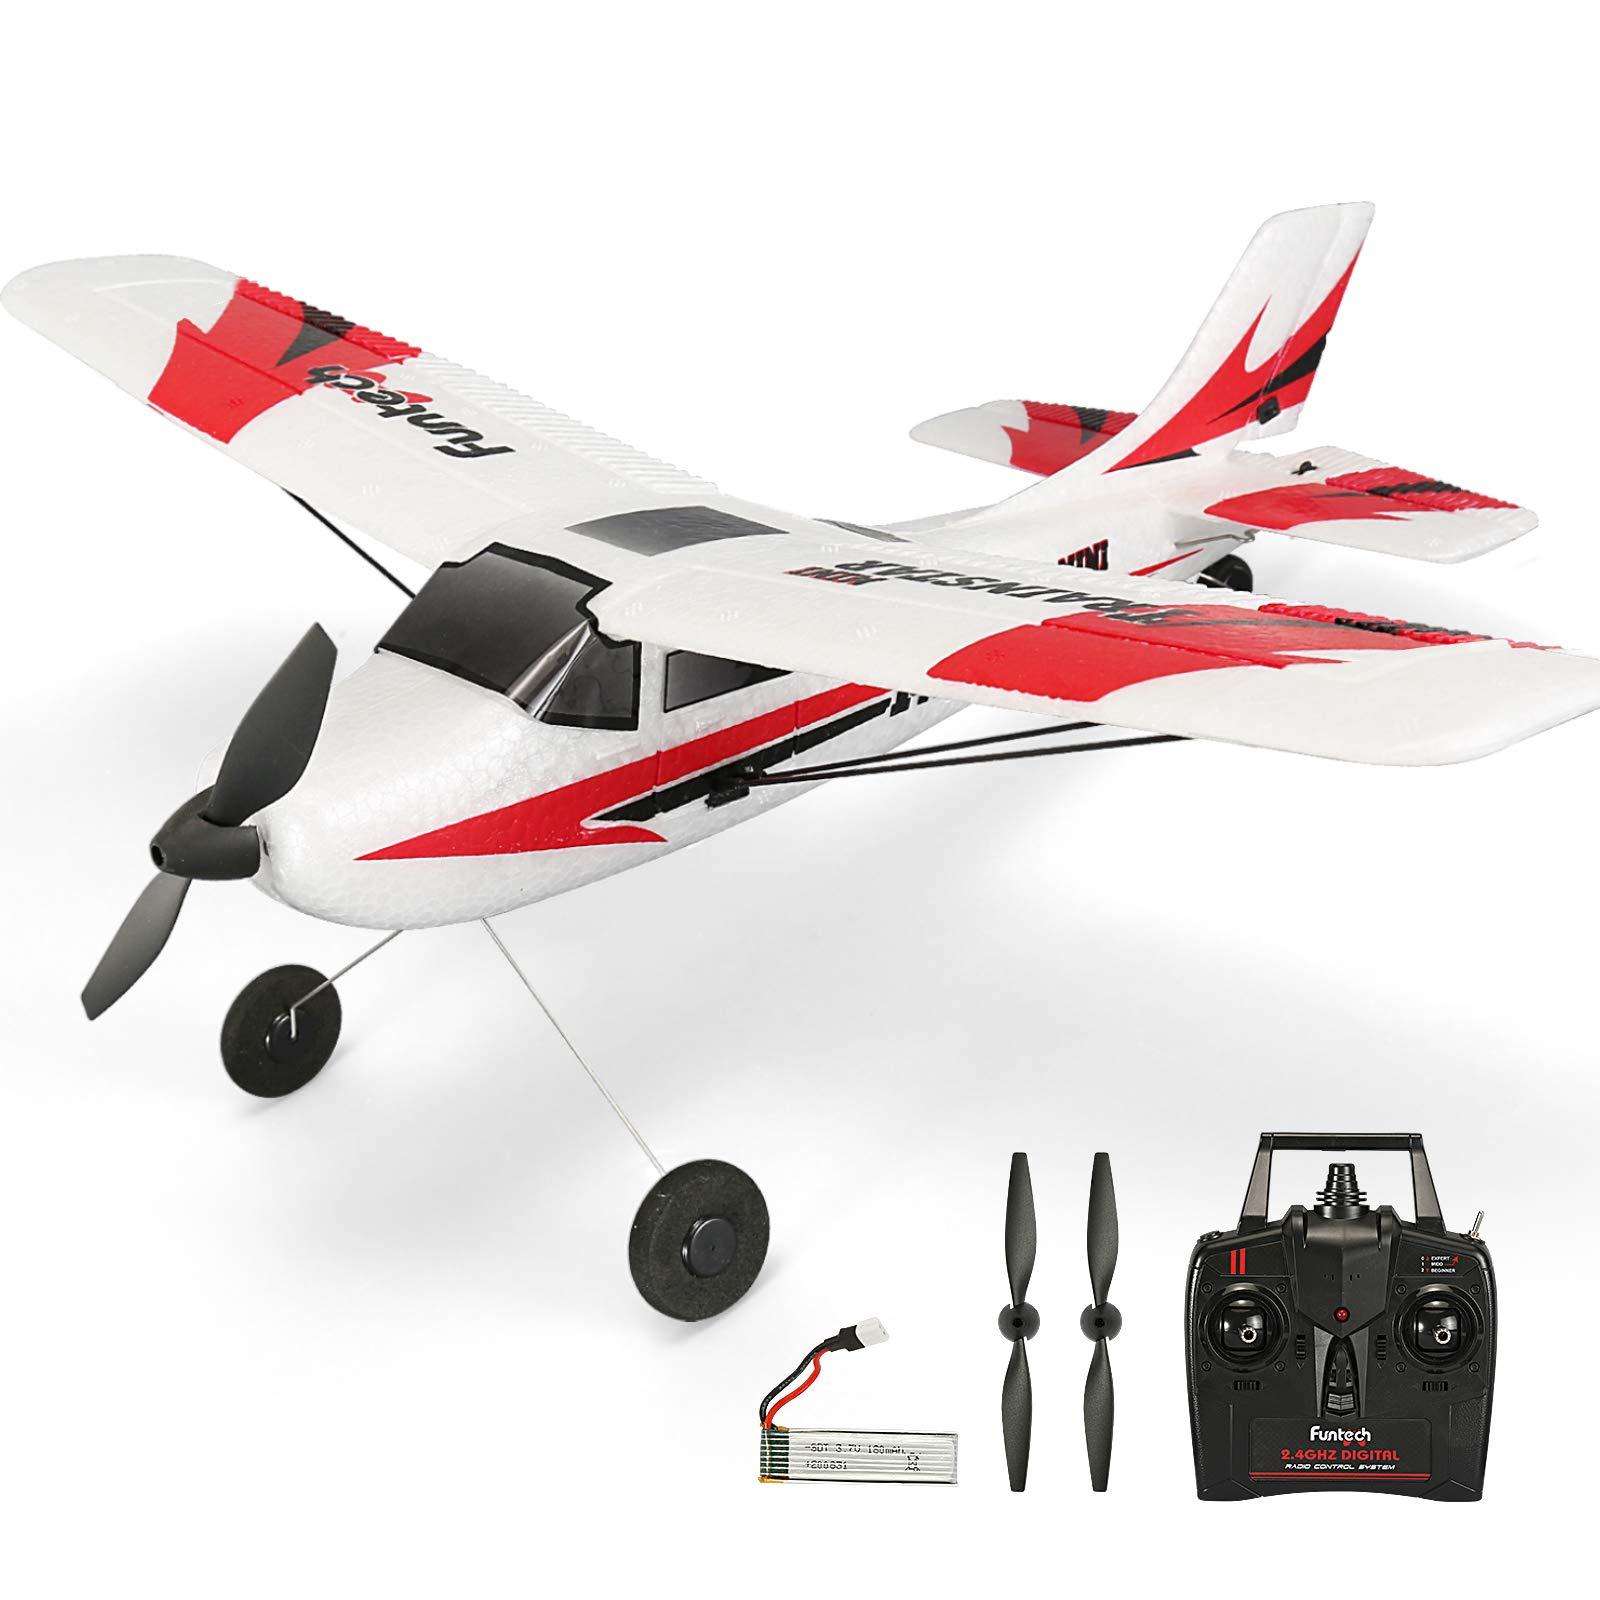 Rc Planes For Sale Near Me:  RC Planes for Sale Near Me